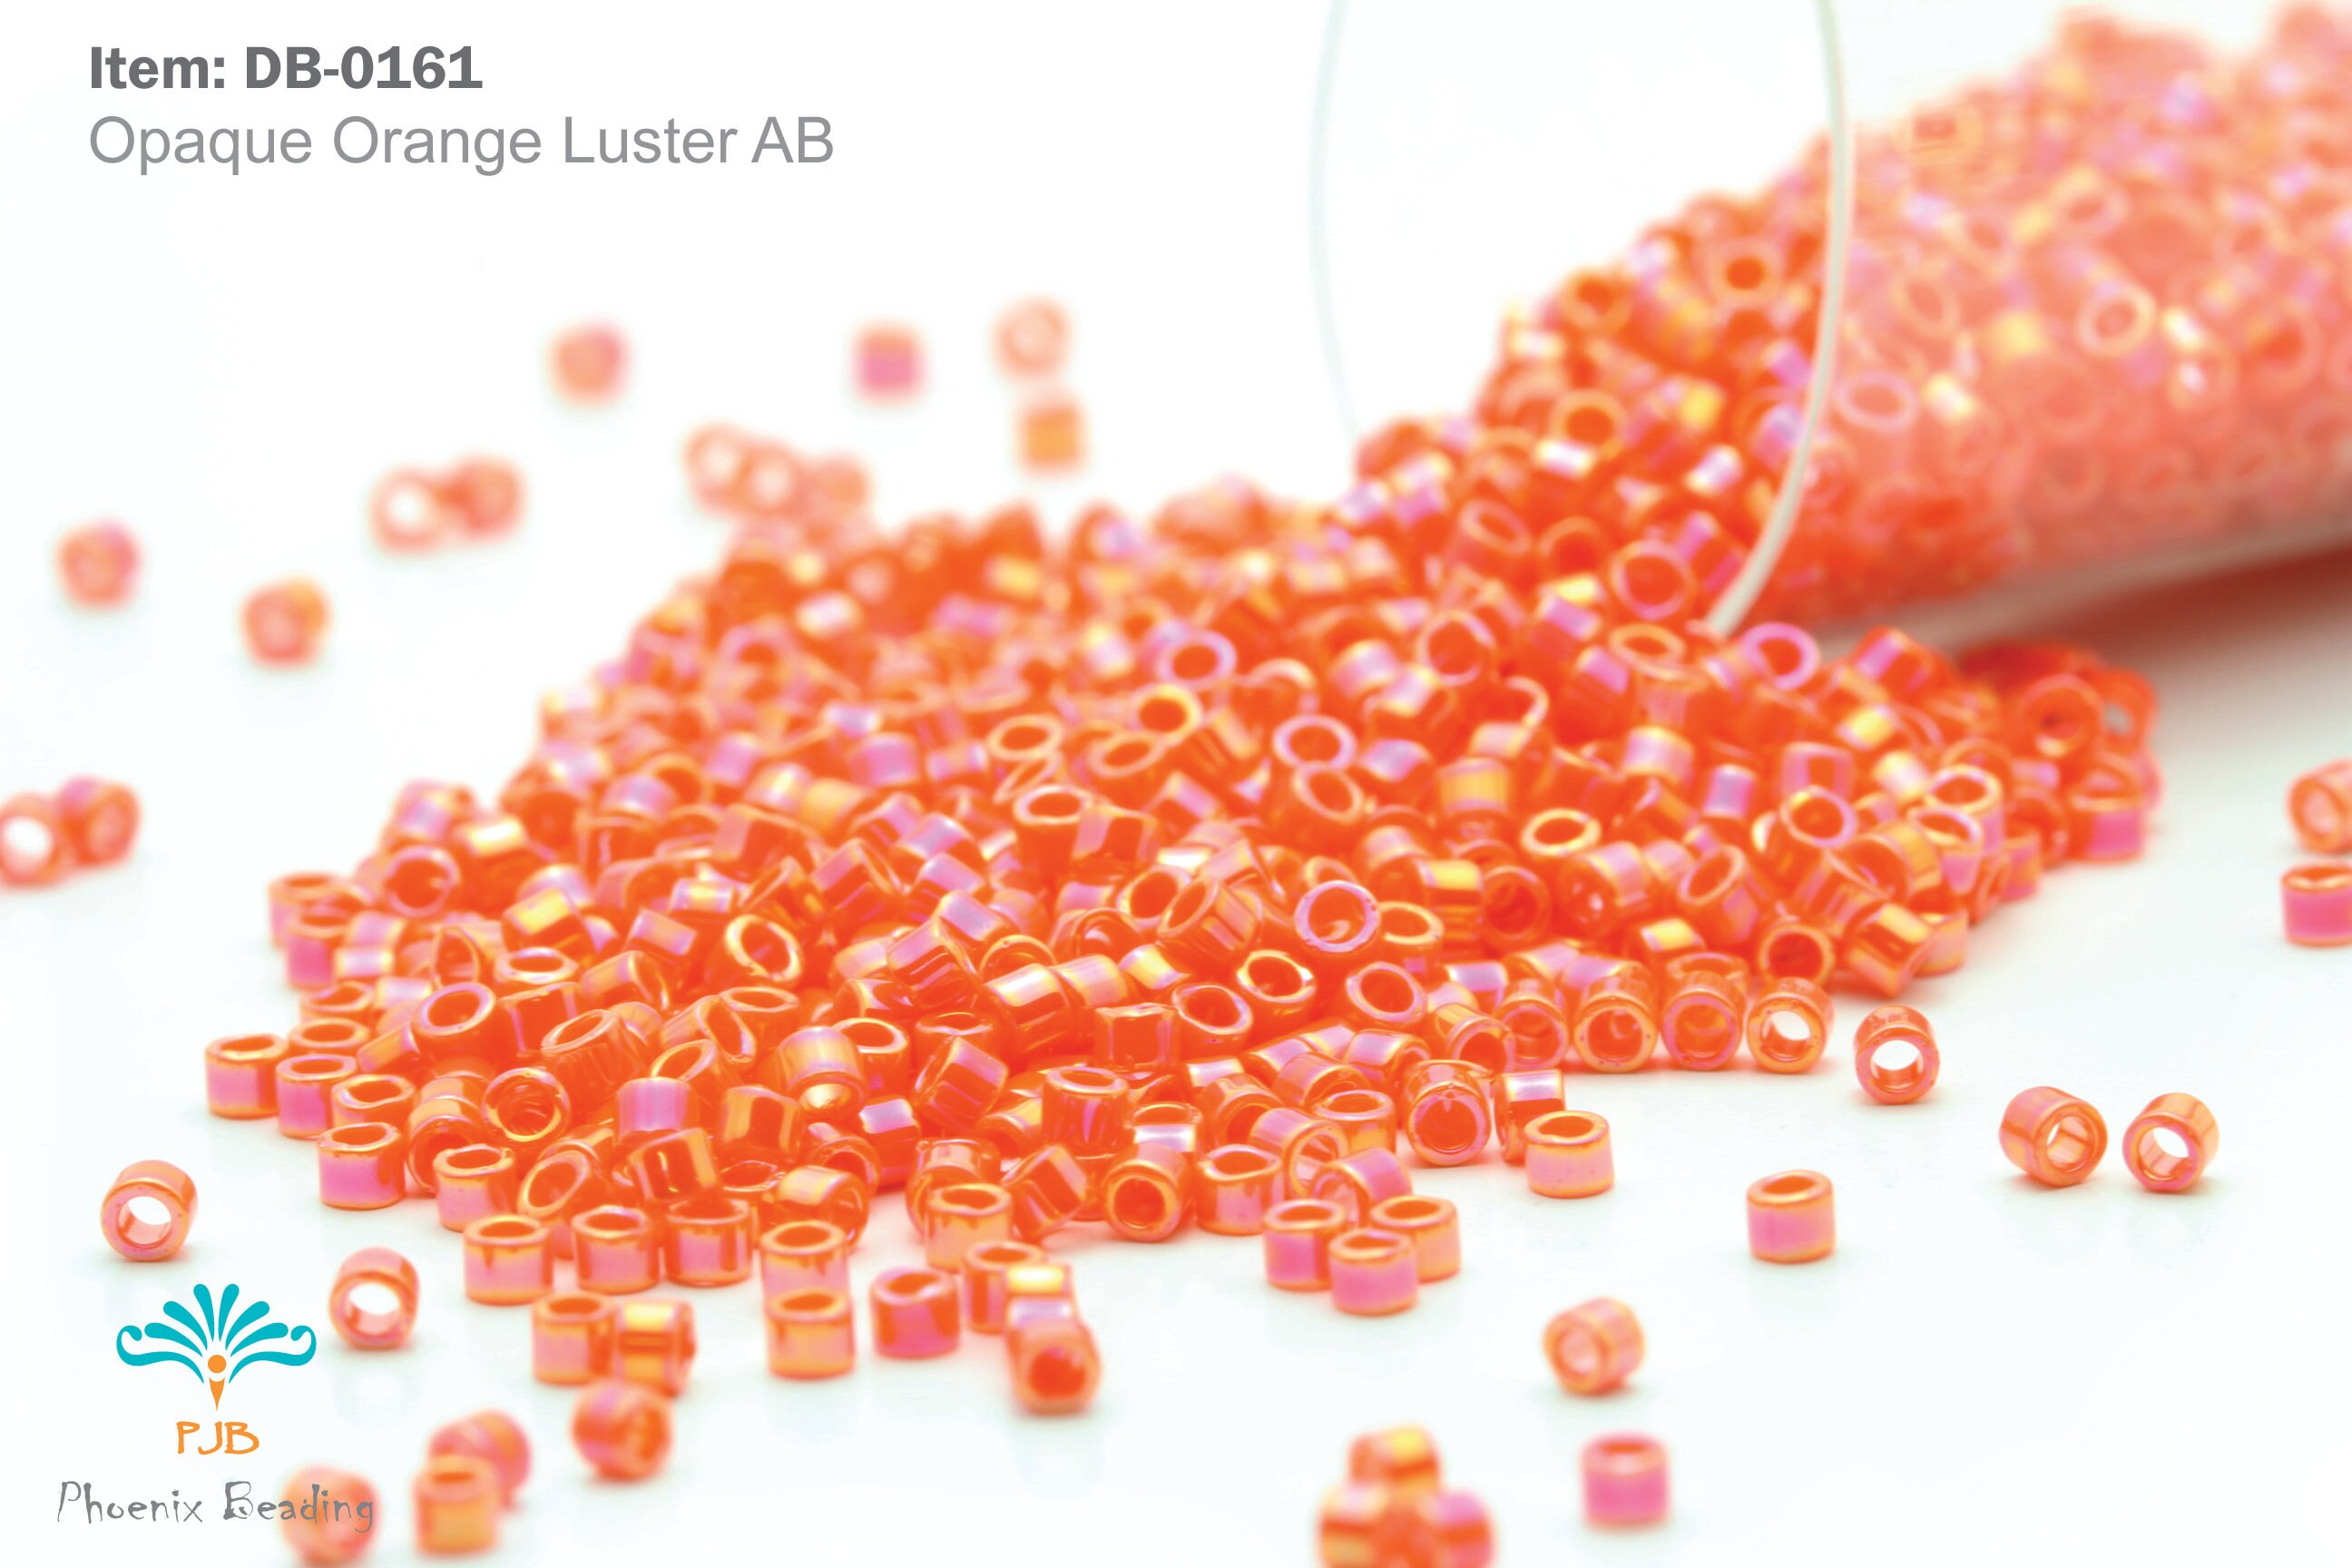 Miyuki Delica Seed Beads 11/0 - Opaque Red Luster DB214 7.2 Grams